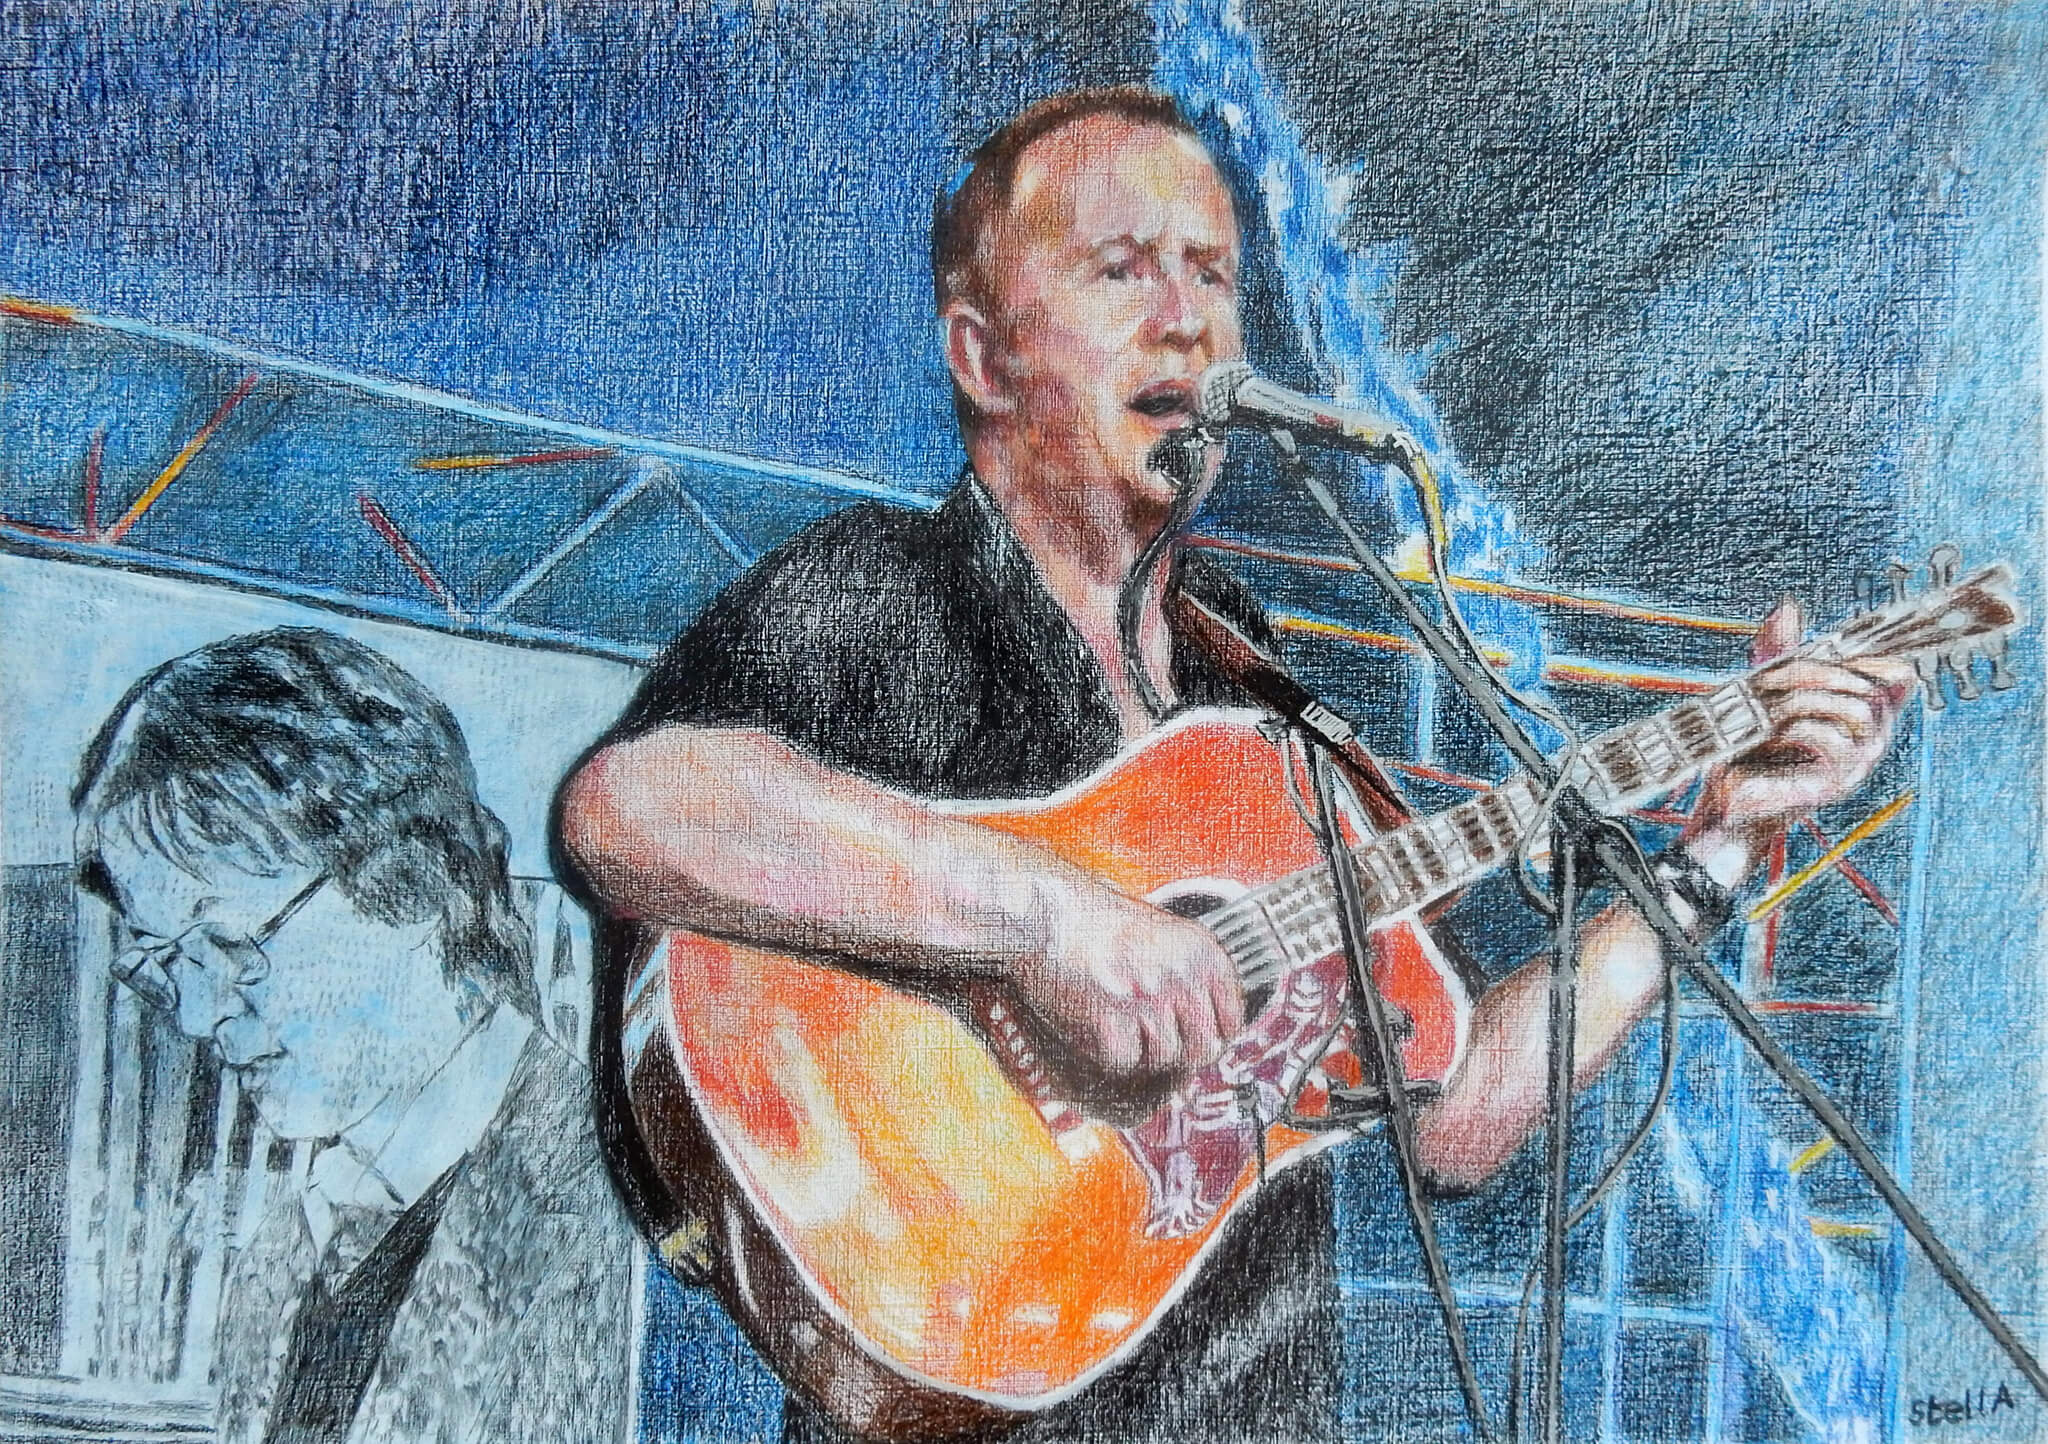 Pete Whitehead performing at retirement gig commissioned drawn portrait artwork by Stella Tooth.